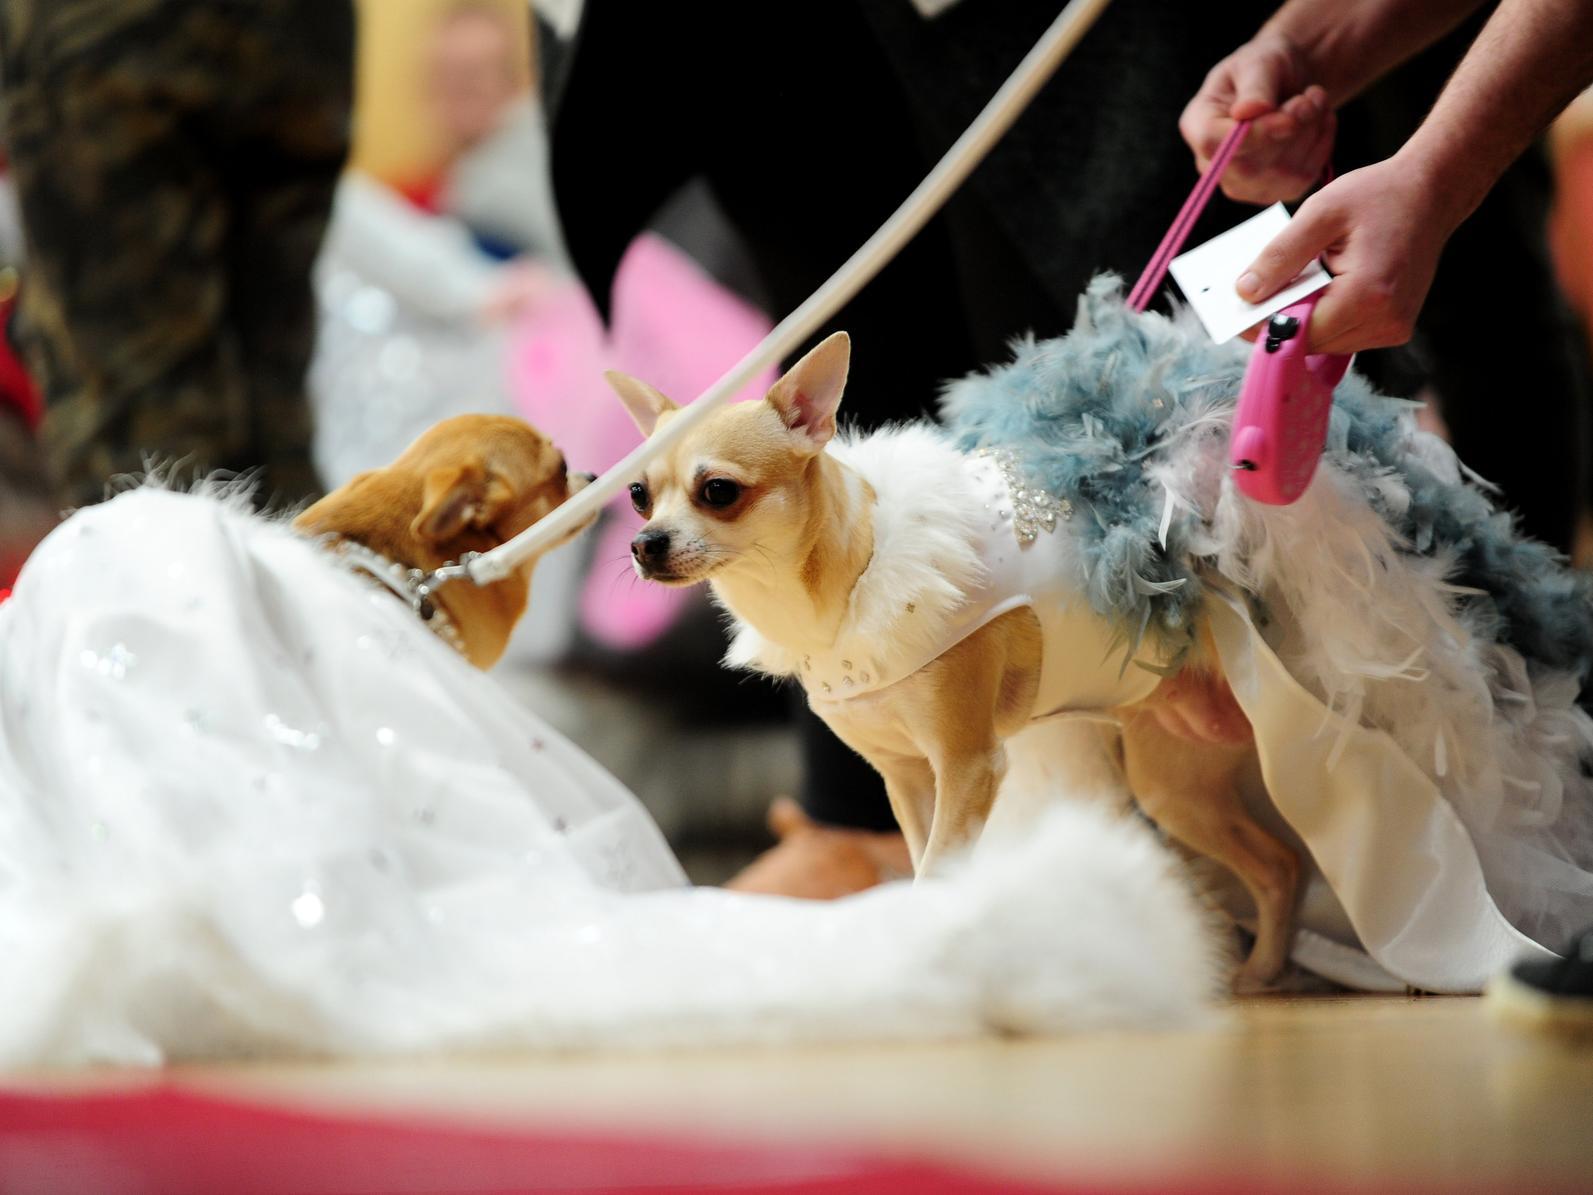 This chihuahua is in an extremely extravagant costume, complete with feather detailing.